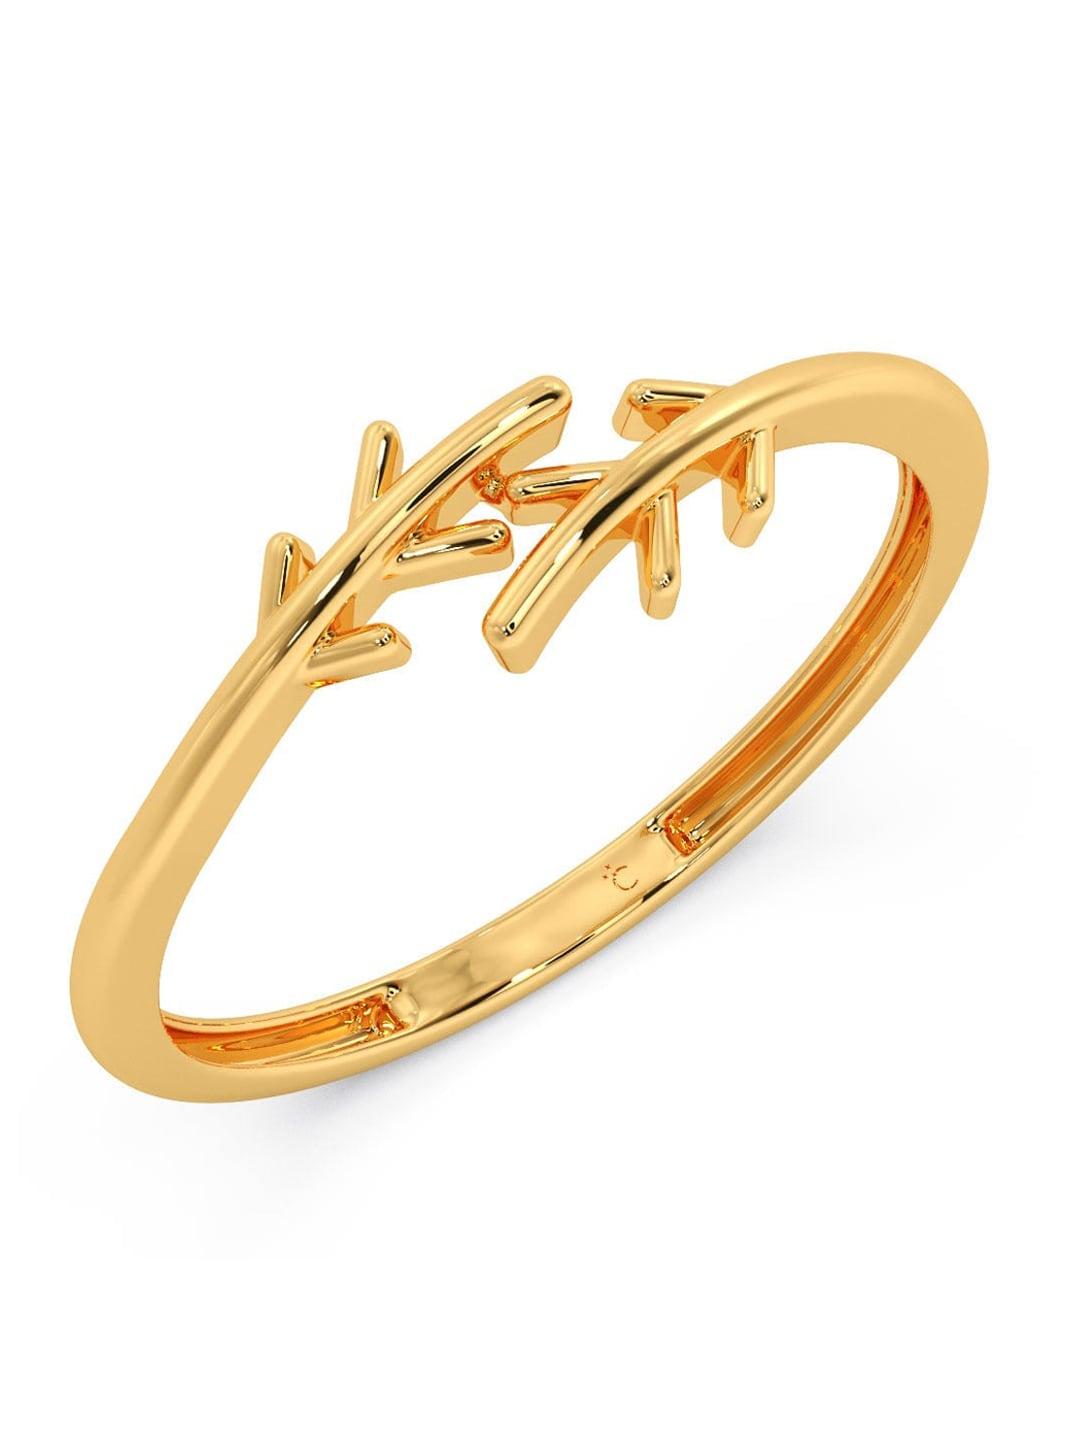 candere-a-kalyan-jewellers-company-18kt-gold-ring-0.57gm